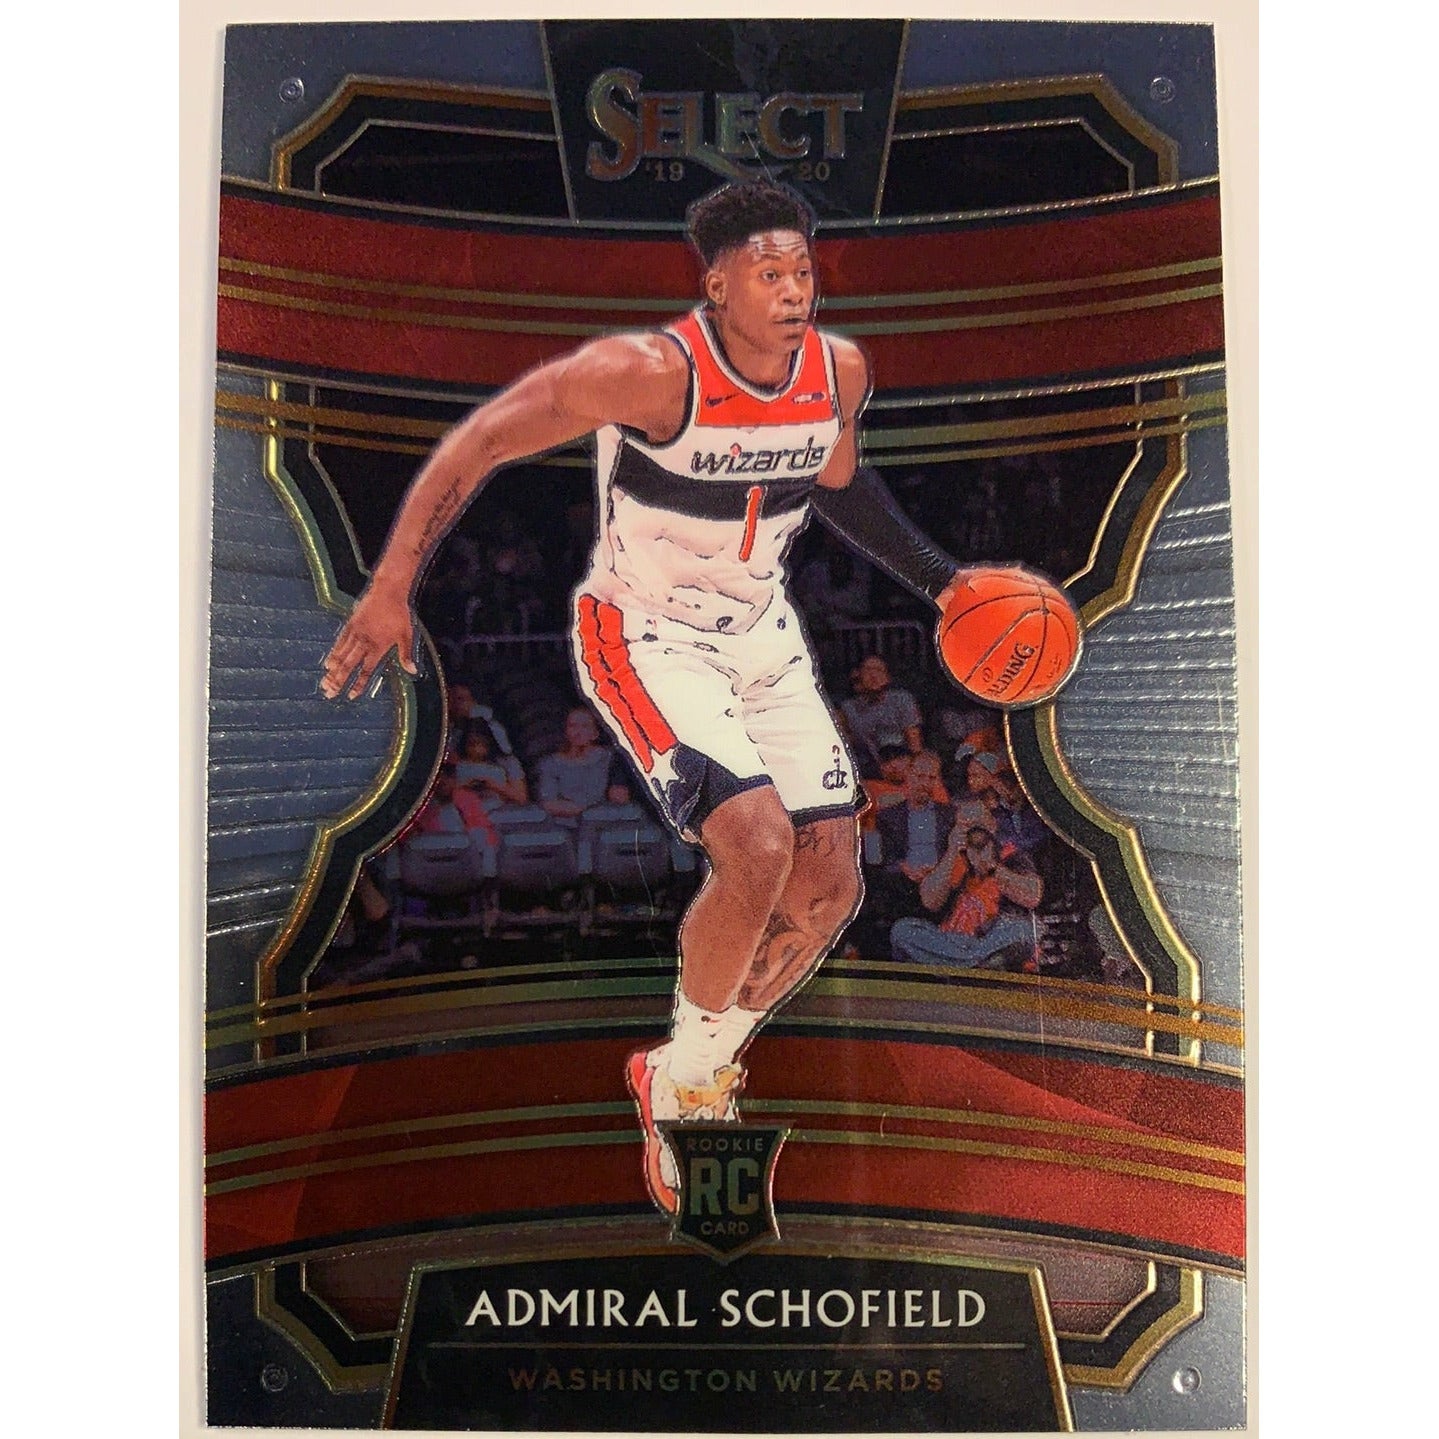 2019-20 Select Admiral Schofield Concourse Level Rookie Card-Local Legends Cards & Collectibles